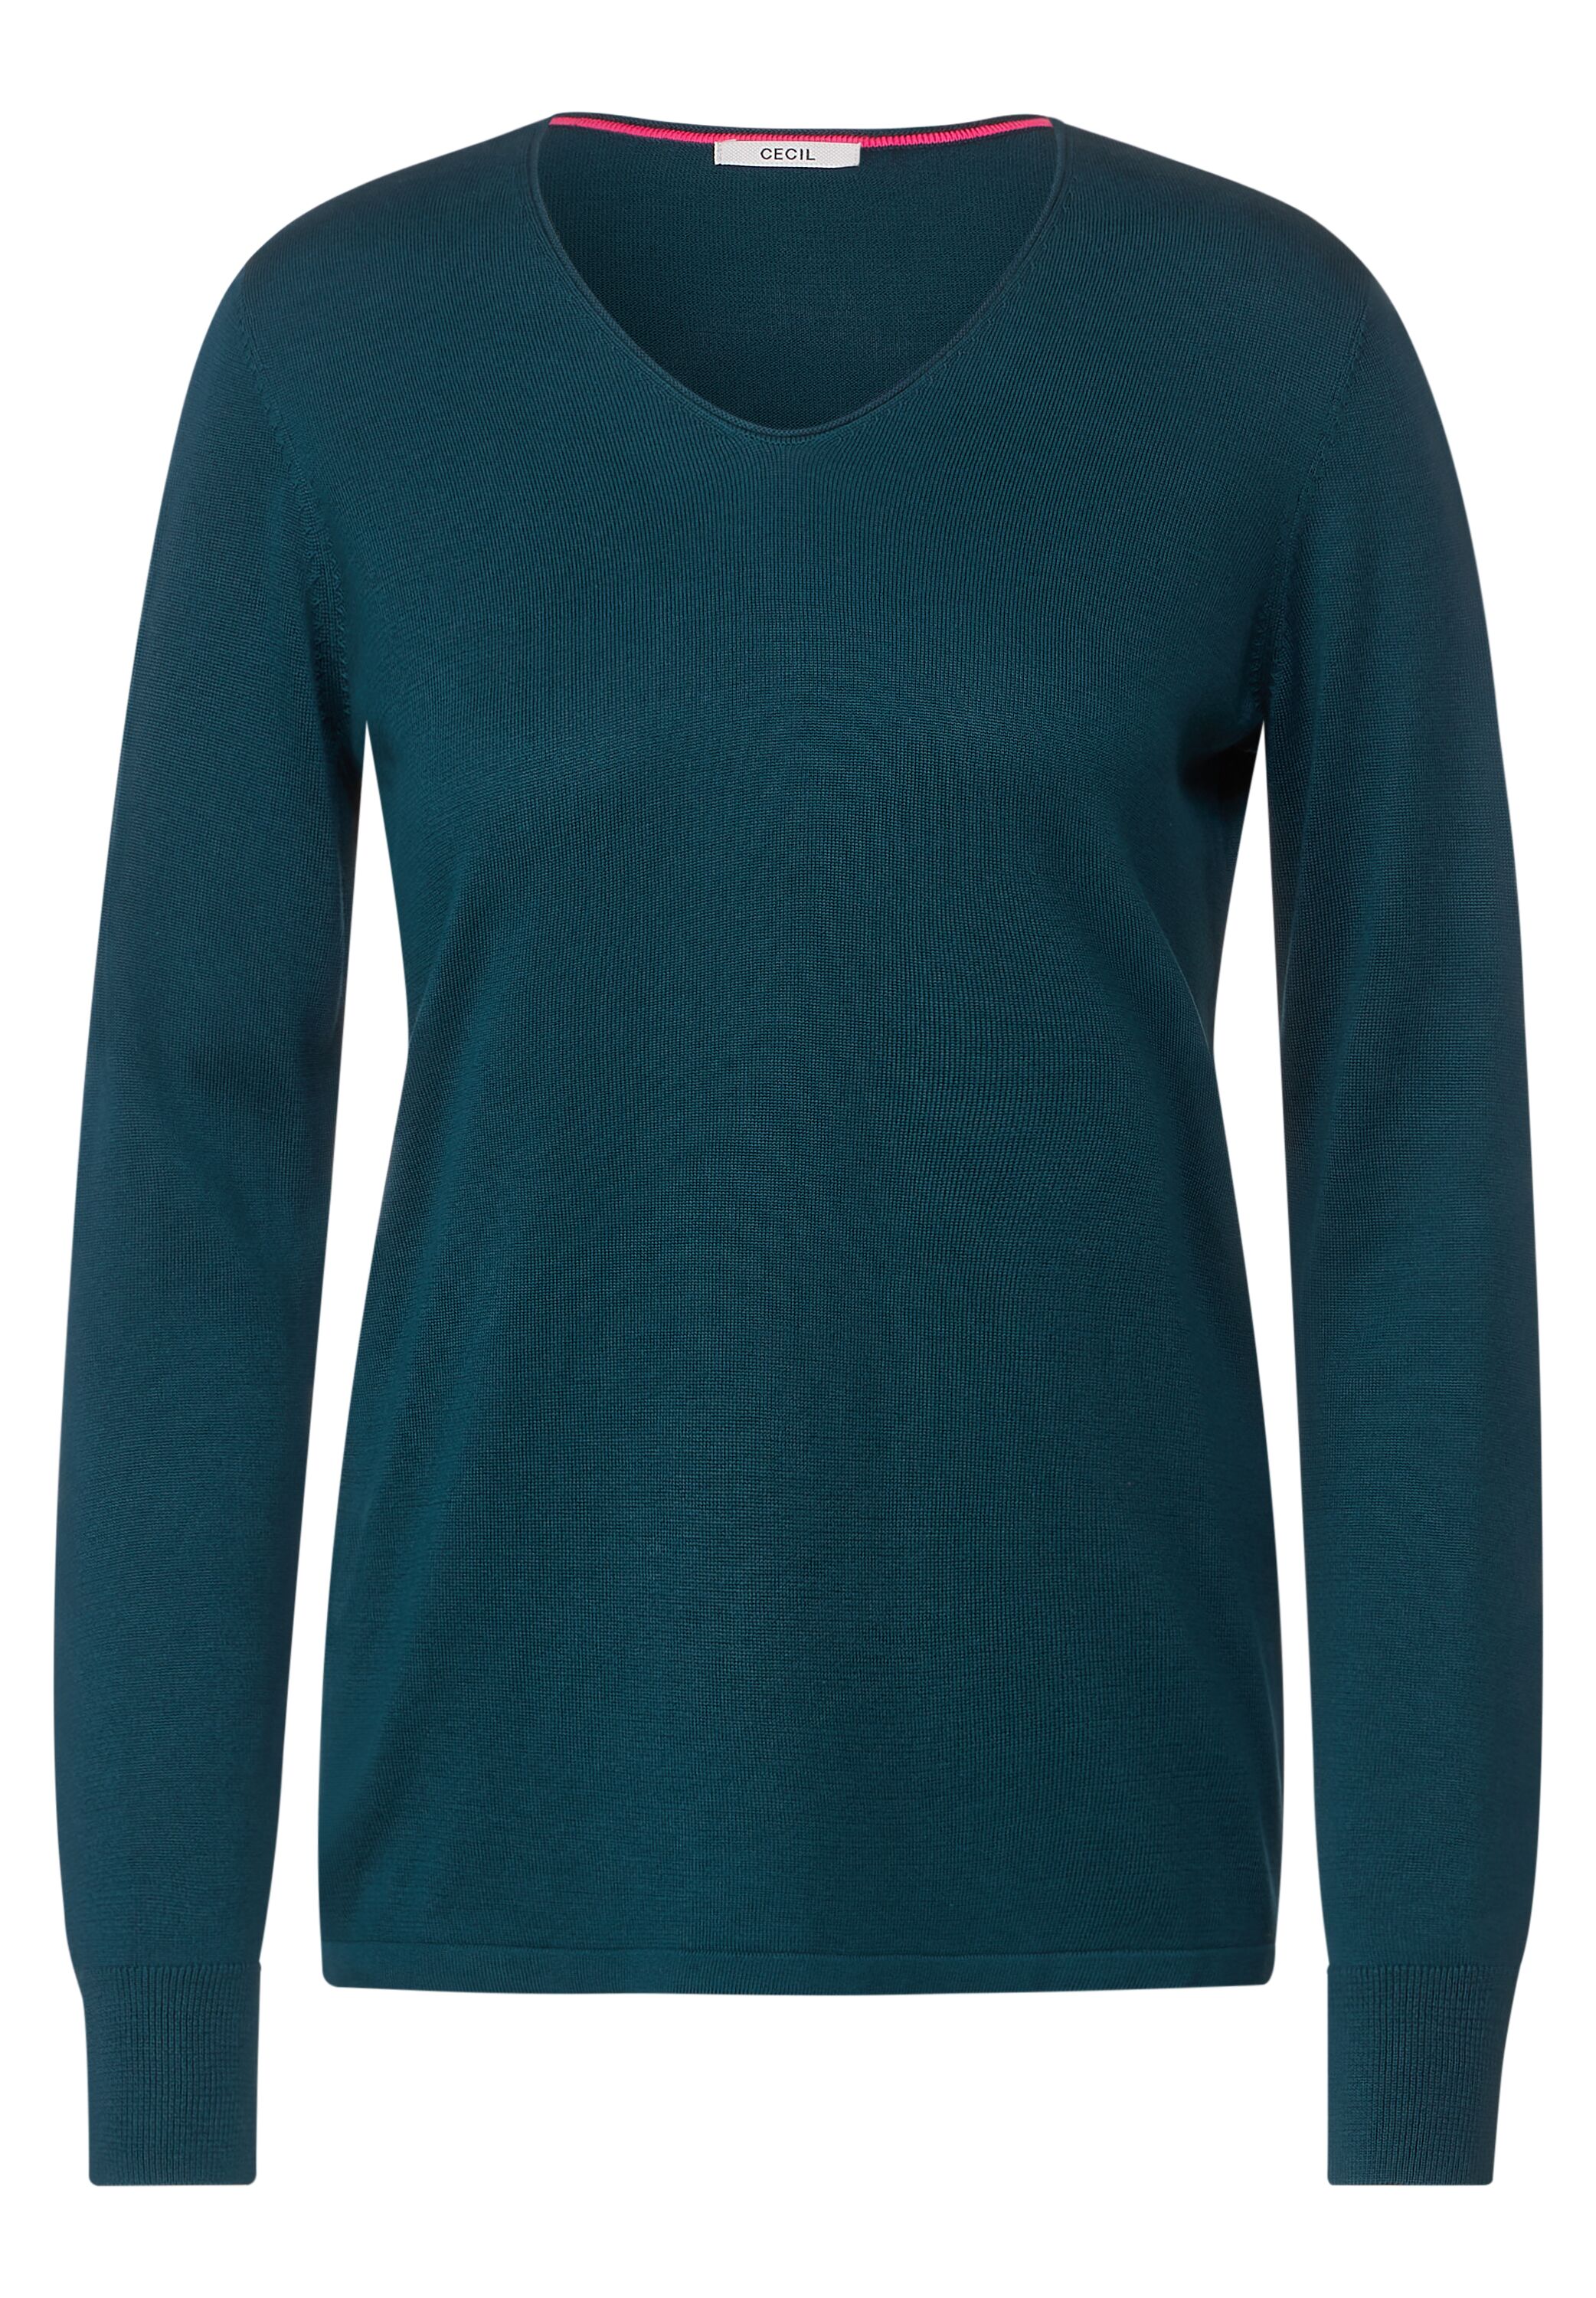 CECIL Pullover Lake CONCEPT Green Deep Mode in - B302342-14926